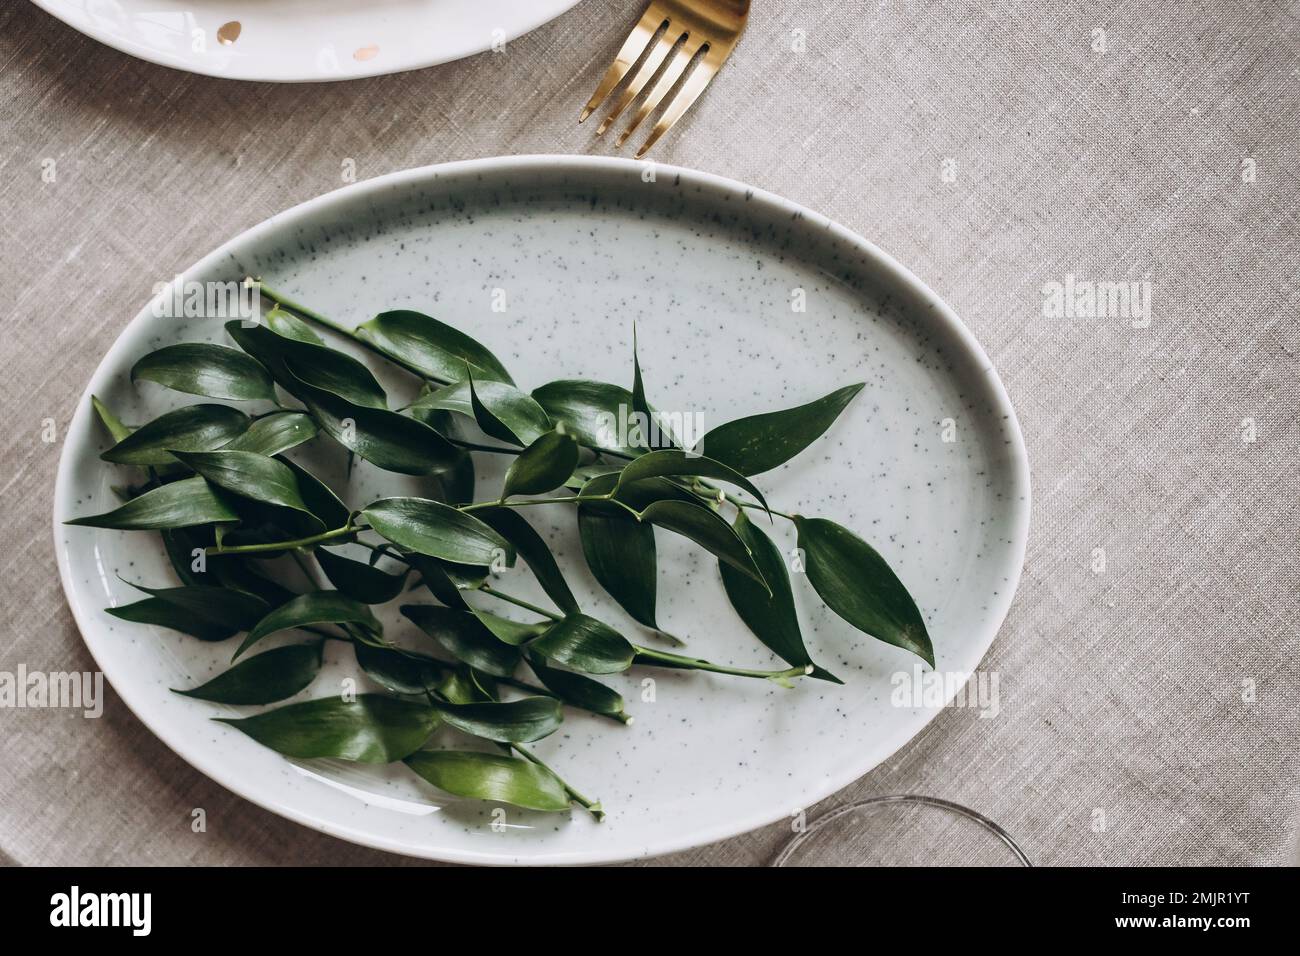 Rustic wedding table seting with vintage plates, green and white eucalyptus garland, gold utensils. Boho style. Table set for an event, party, date or Stock Photo